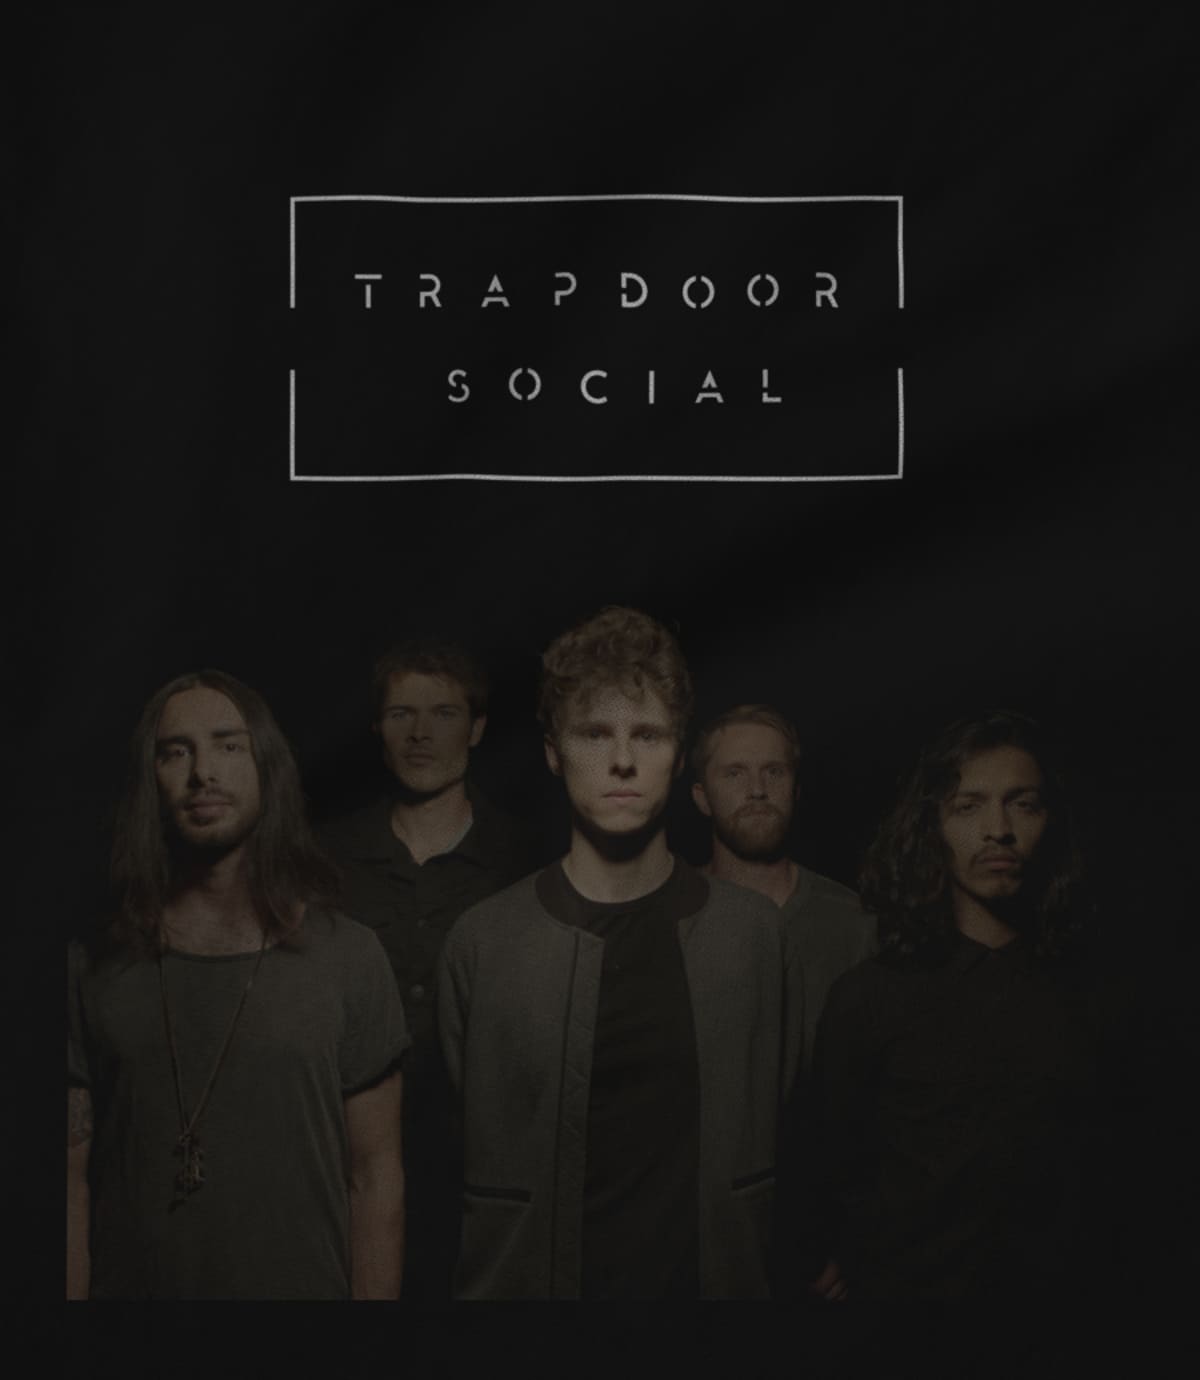 Trapdoor social winning as truth band pic 1508373967